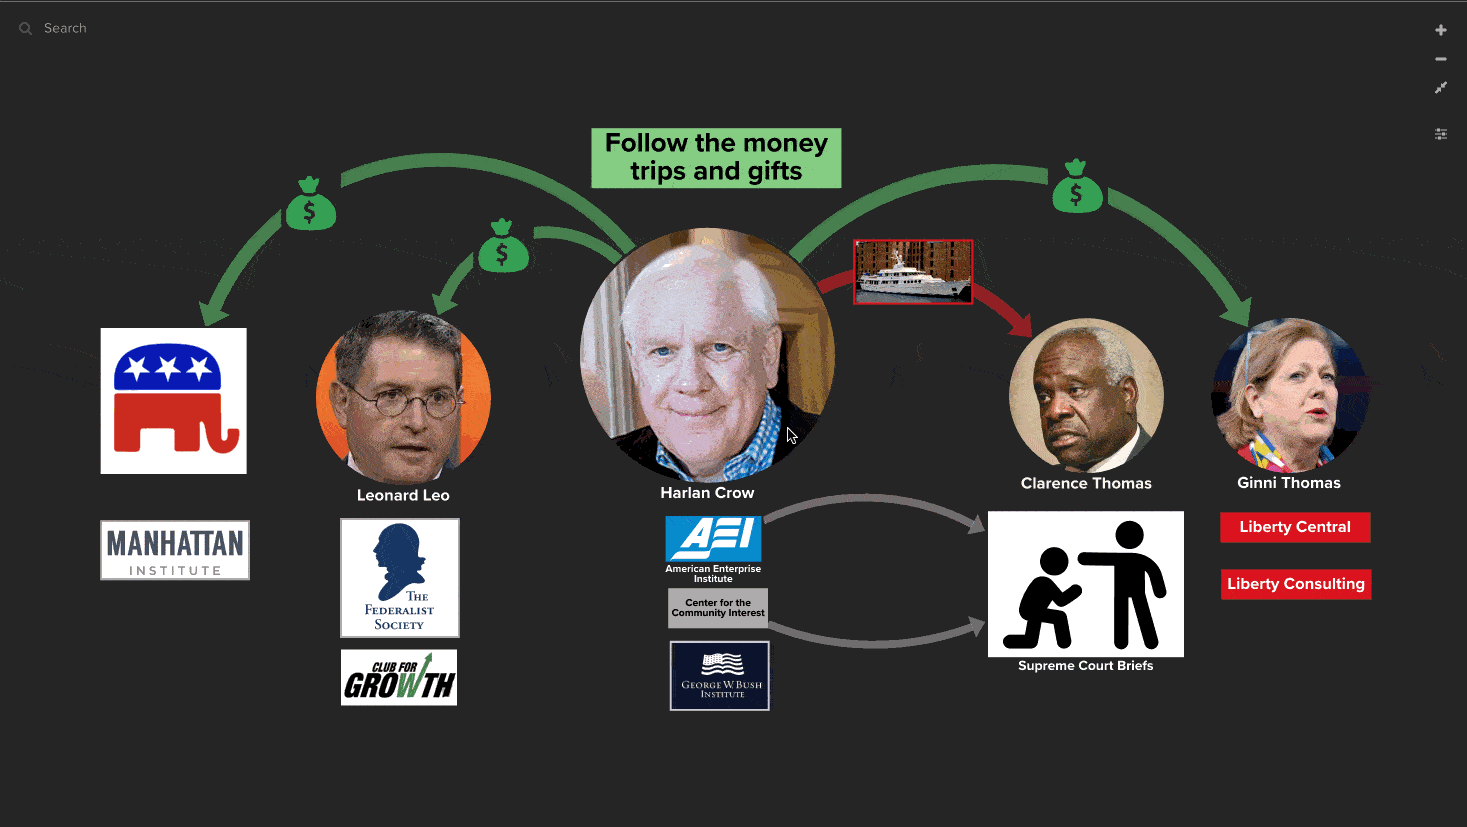 Harlan Crow - Clarence Thomas: Follow the money, gifts and trips.